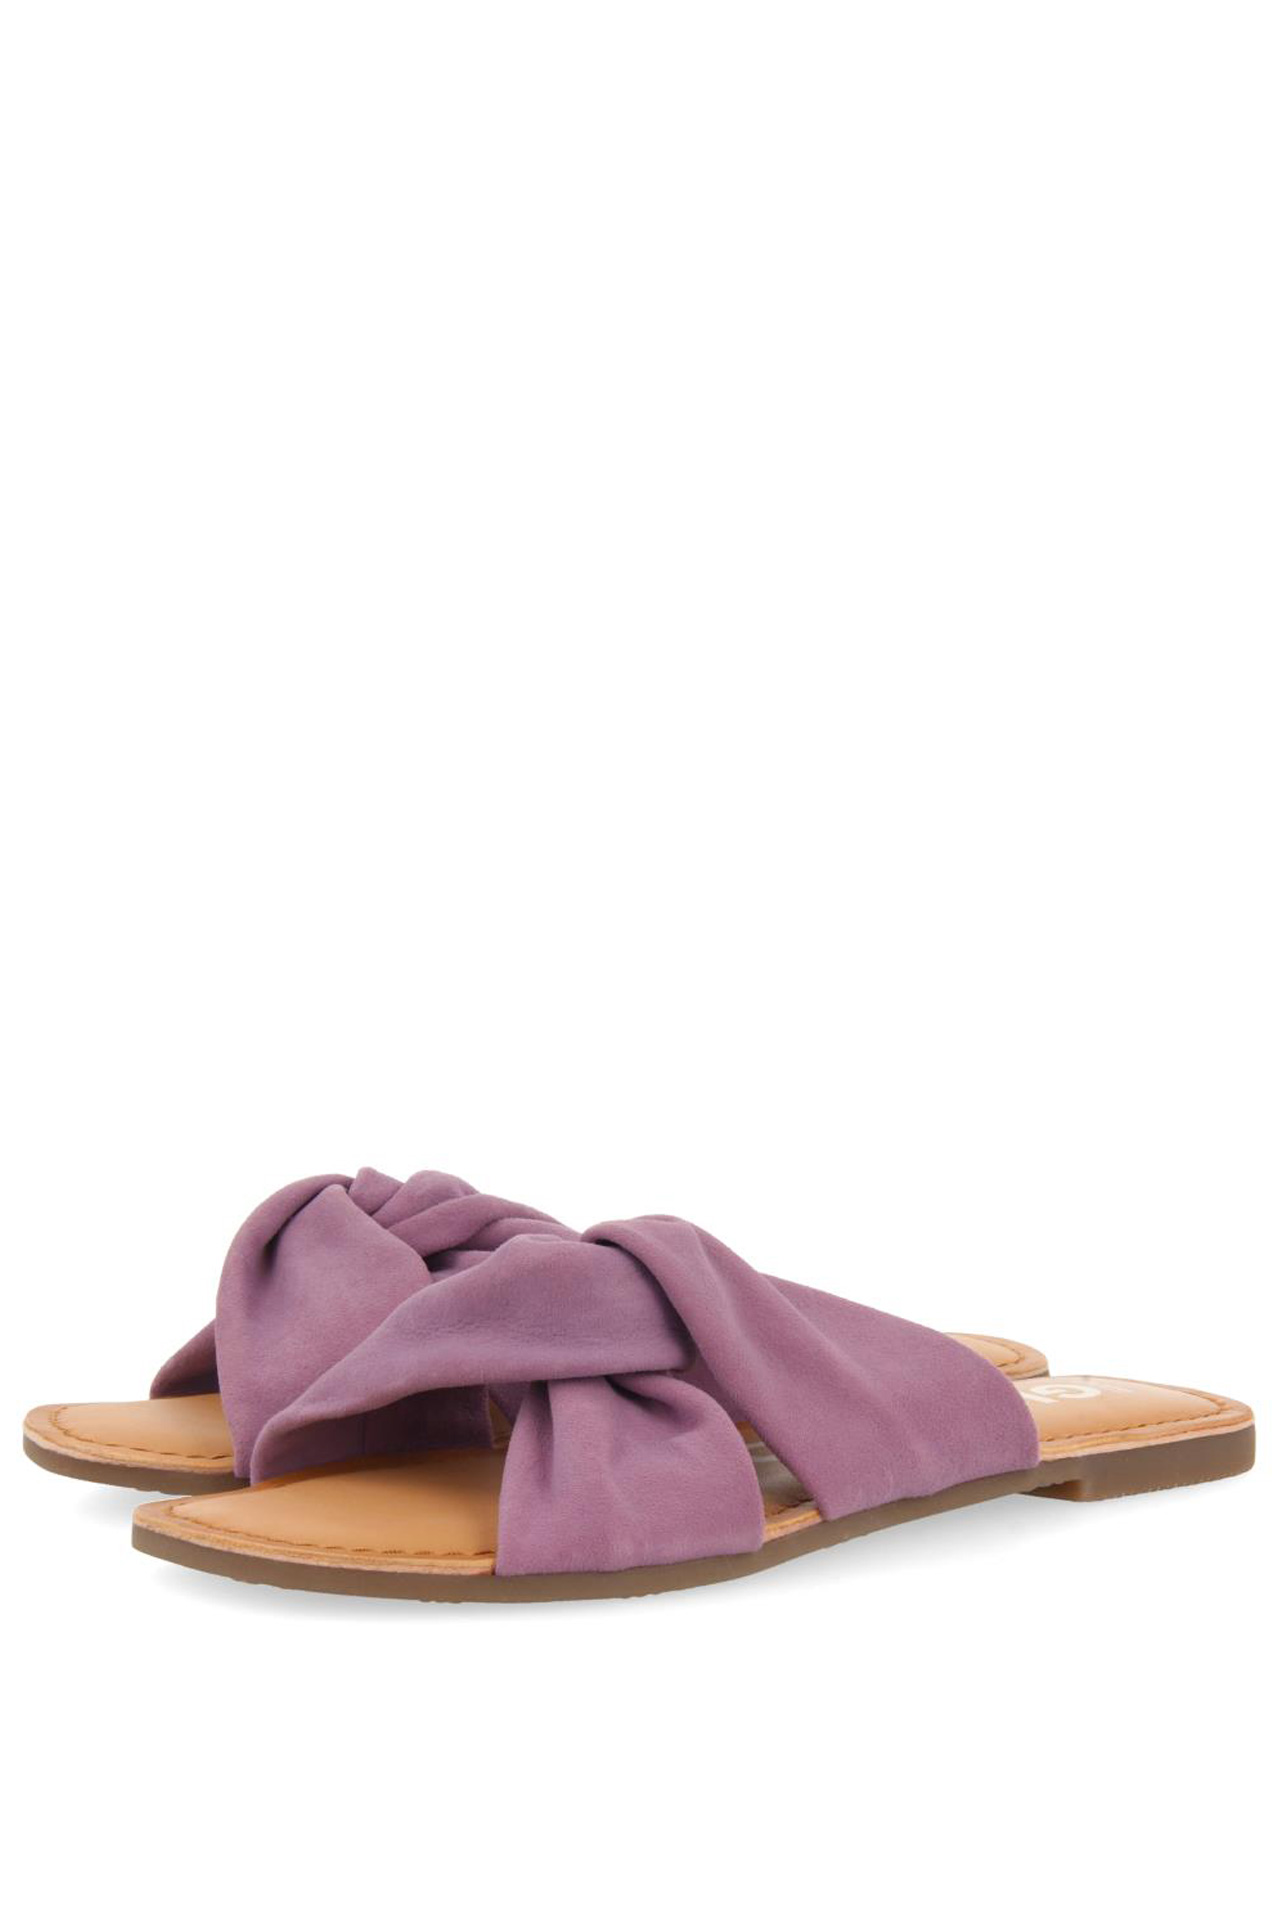 GIOSEPPO AGIRA LILAC SOFT SUEDE LEATHER SLIDE SANDALS